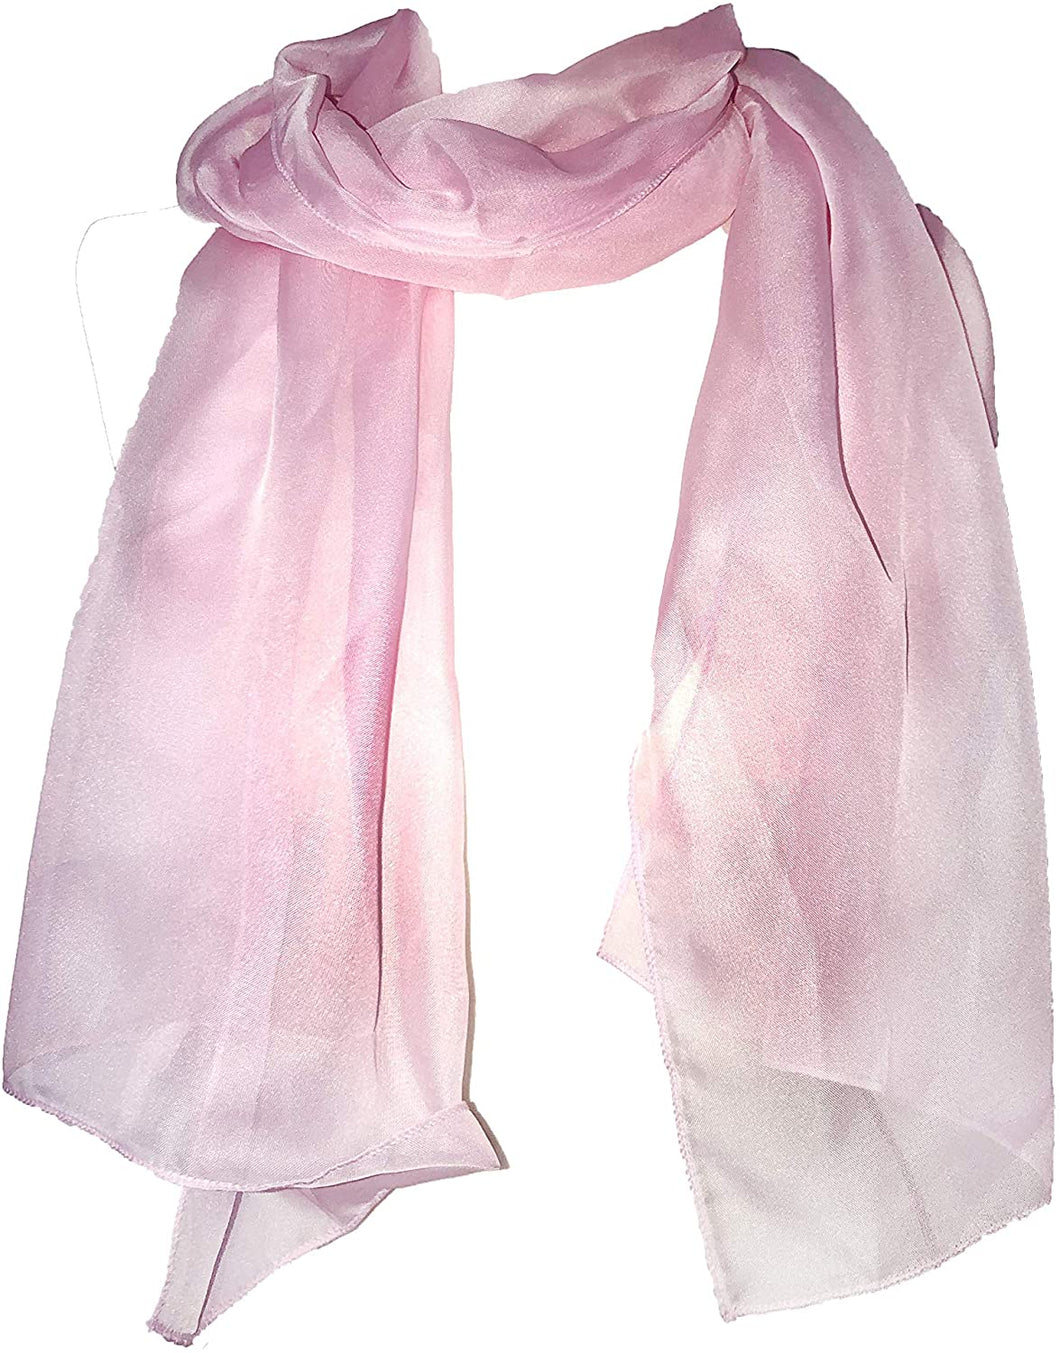 Plain Baby Pink Chiffon Style Scarf Thin Pretty Scarf Great for Any Outfit Lovely Gift